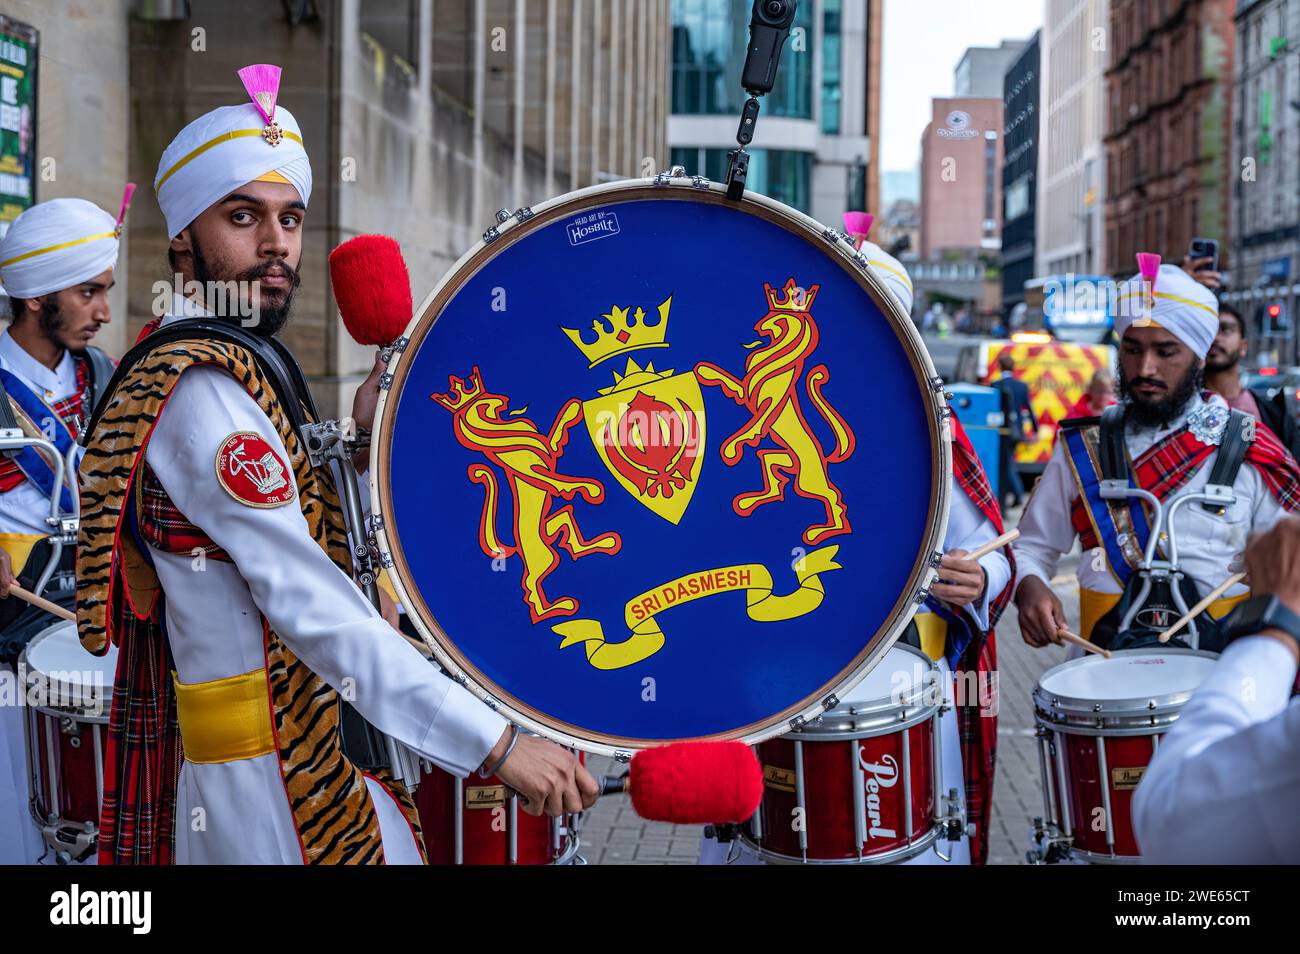 Drummesr from the Sri Dasmesh Pipe Band practicing outside Glasgow Royal Concert Hall during the week of the World Pipe Band Championships. Stock Photo